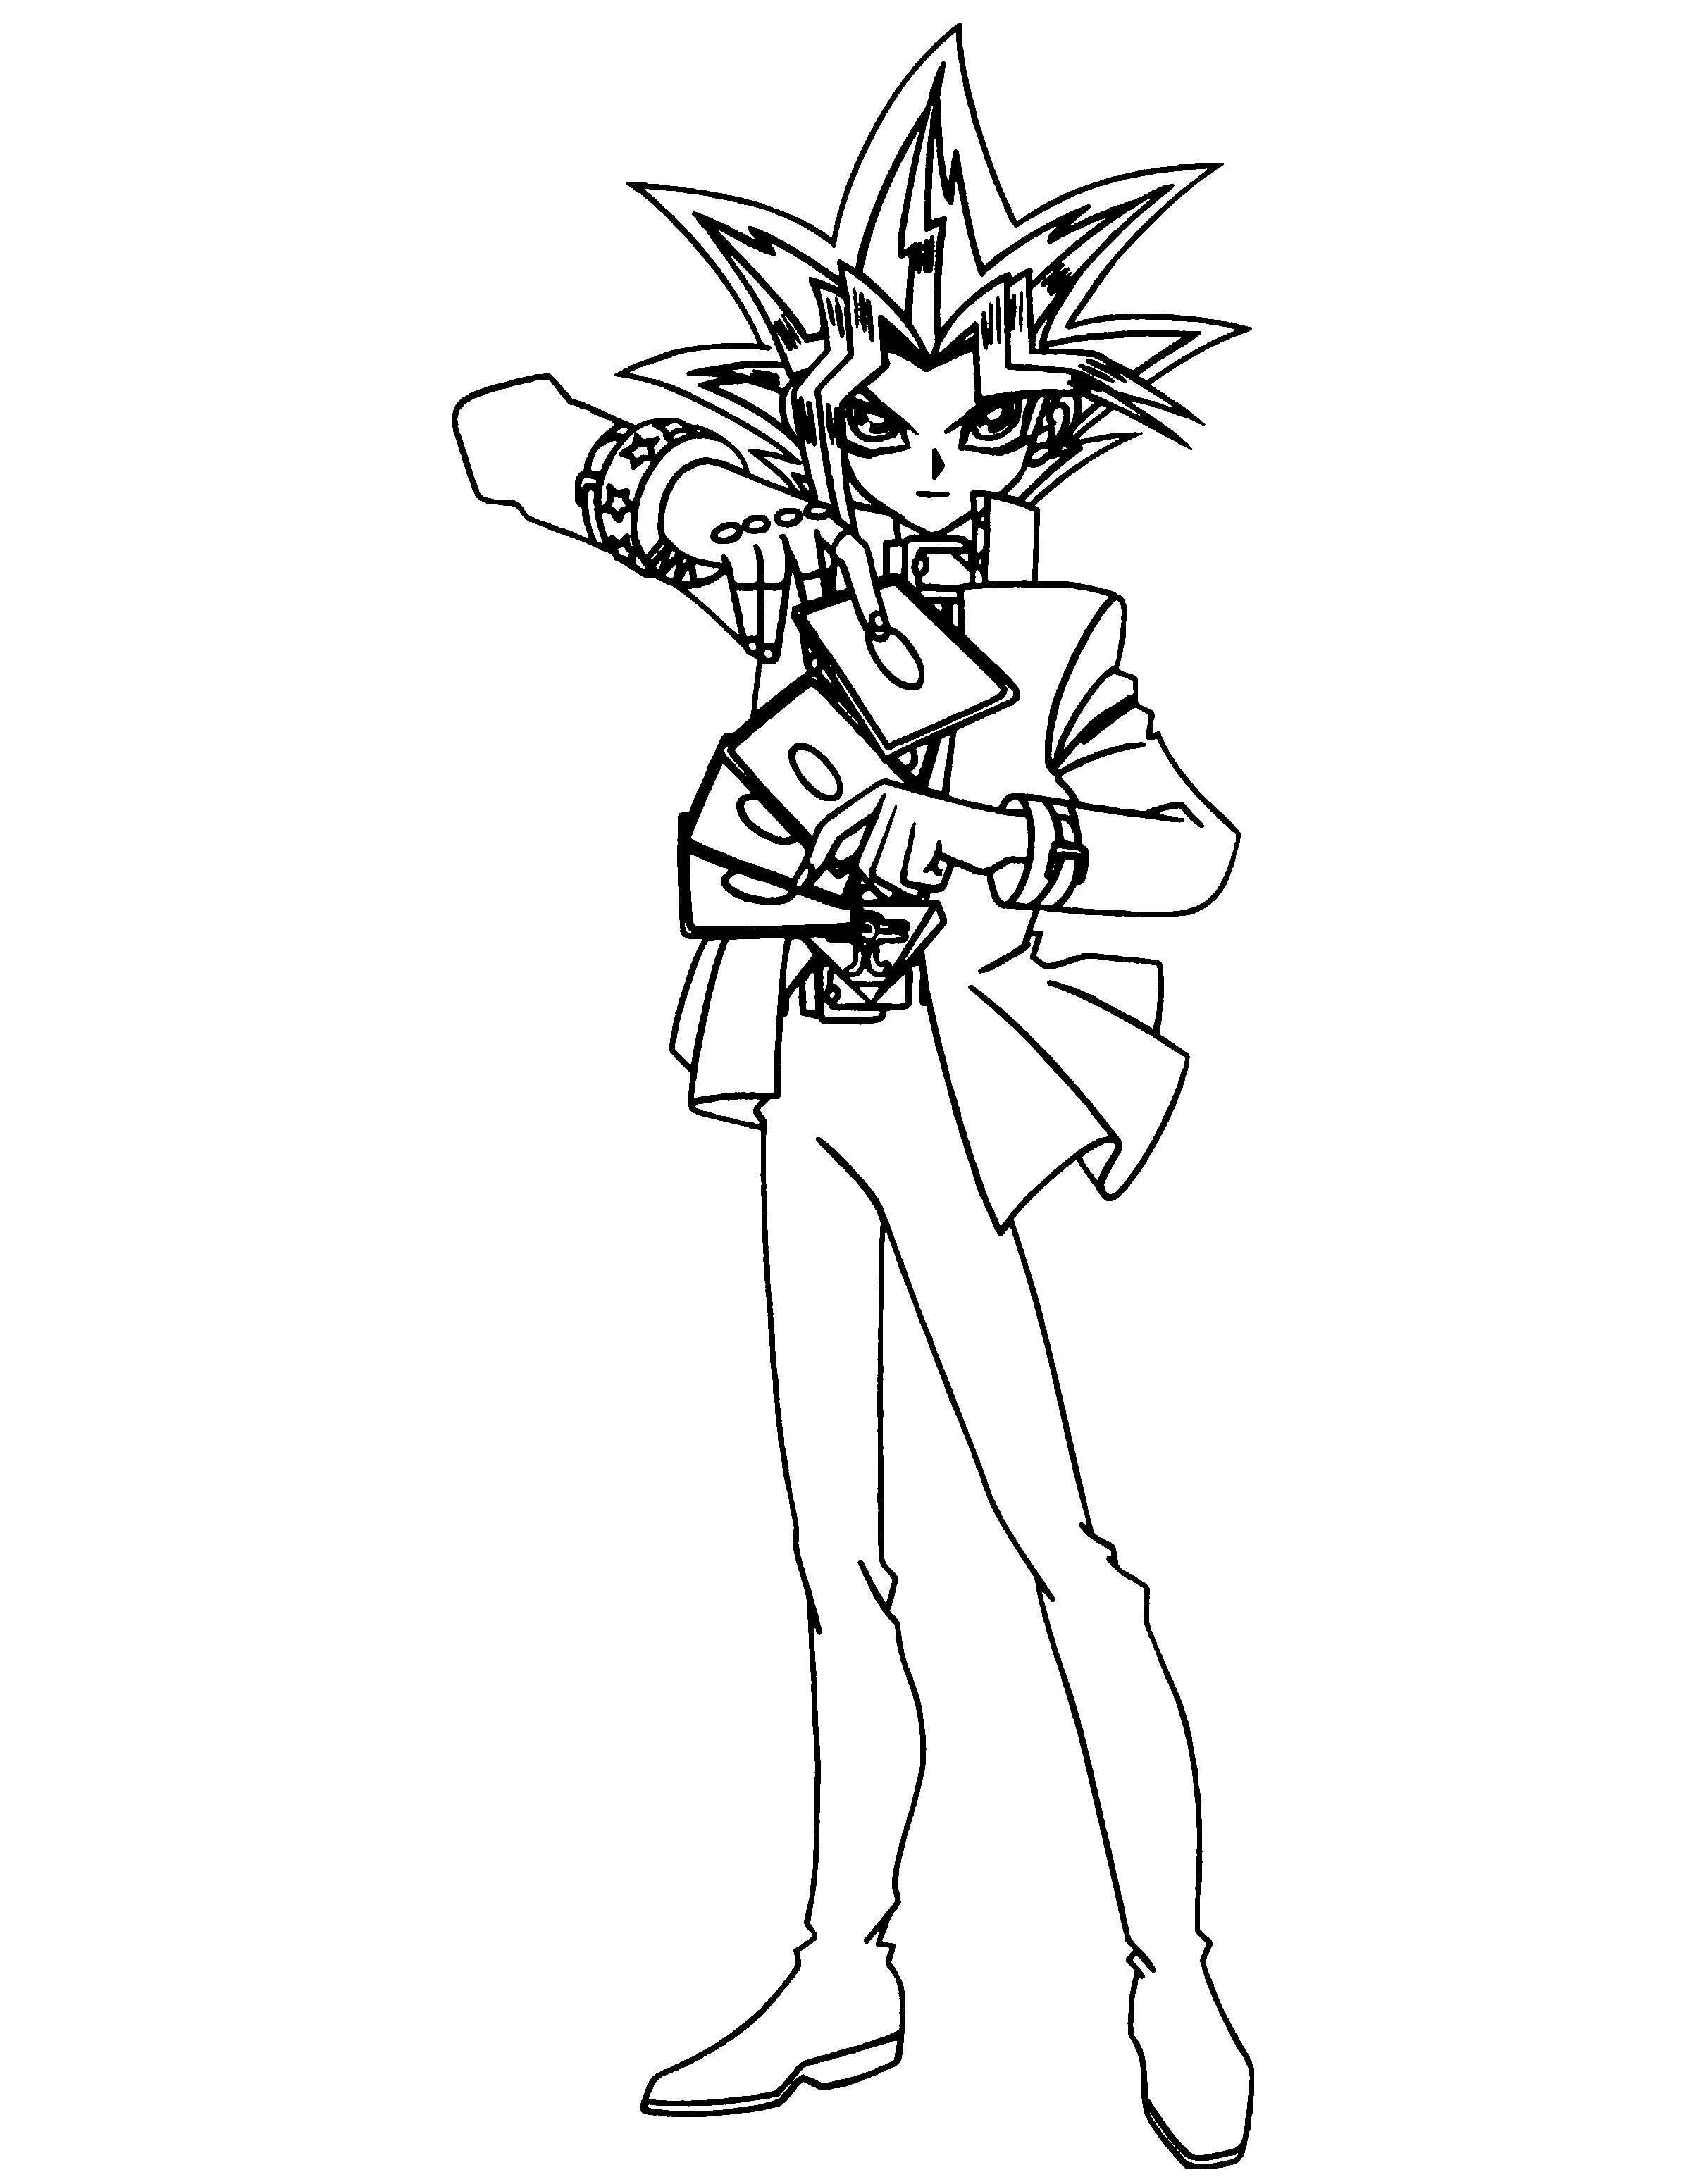 Yu gi oh Coloring Pages - Coloringpages1001.com